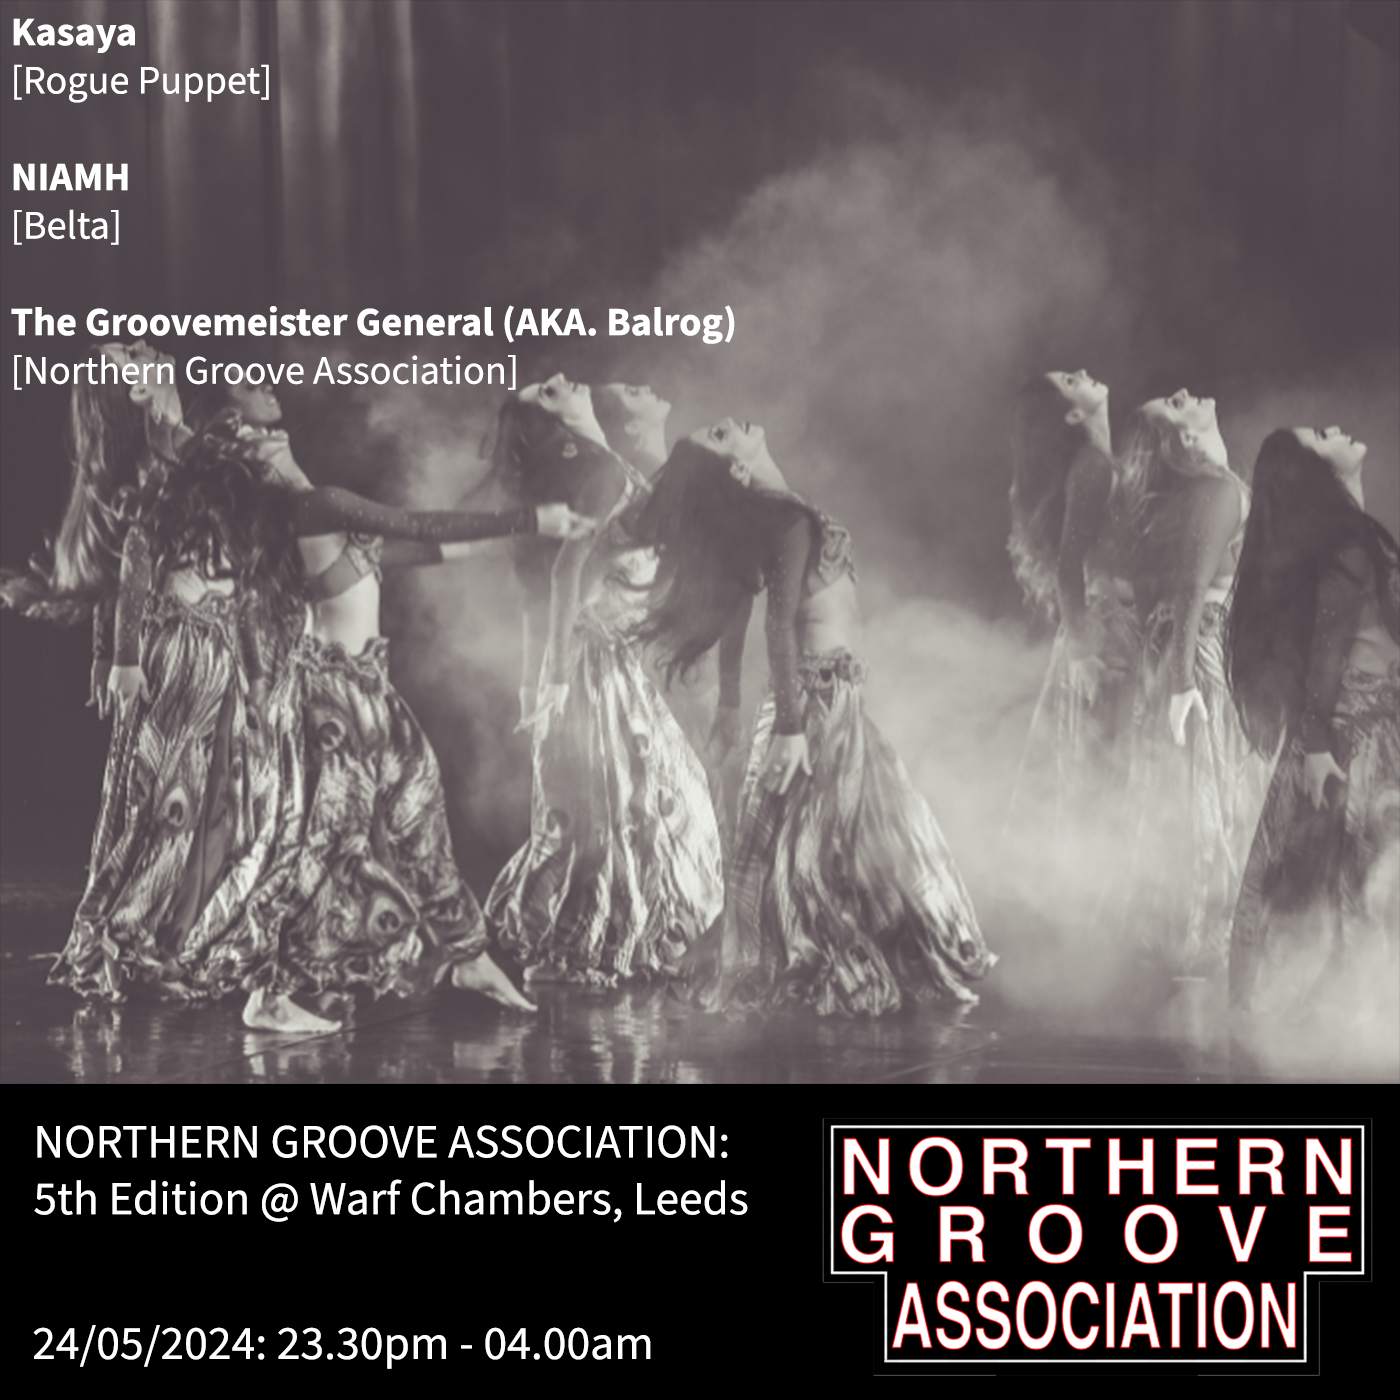 Northern Groove Association: 5th Edition - Página frontal